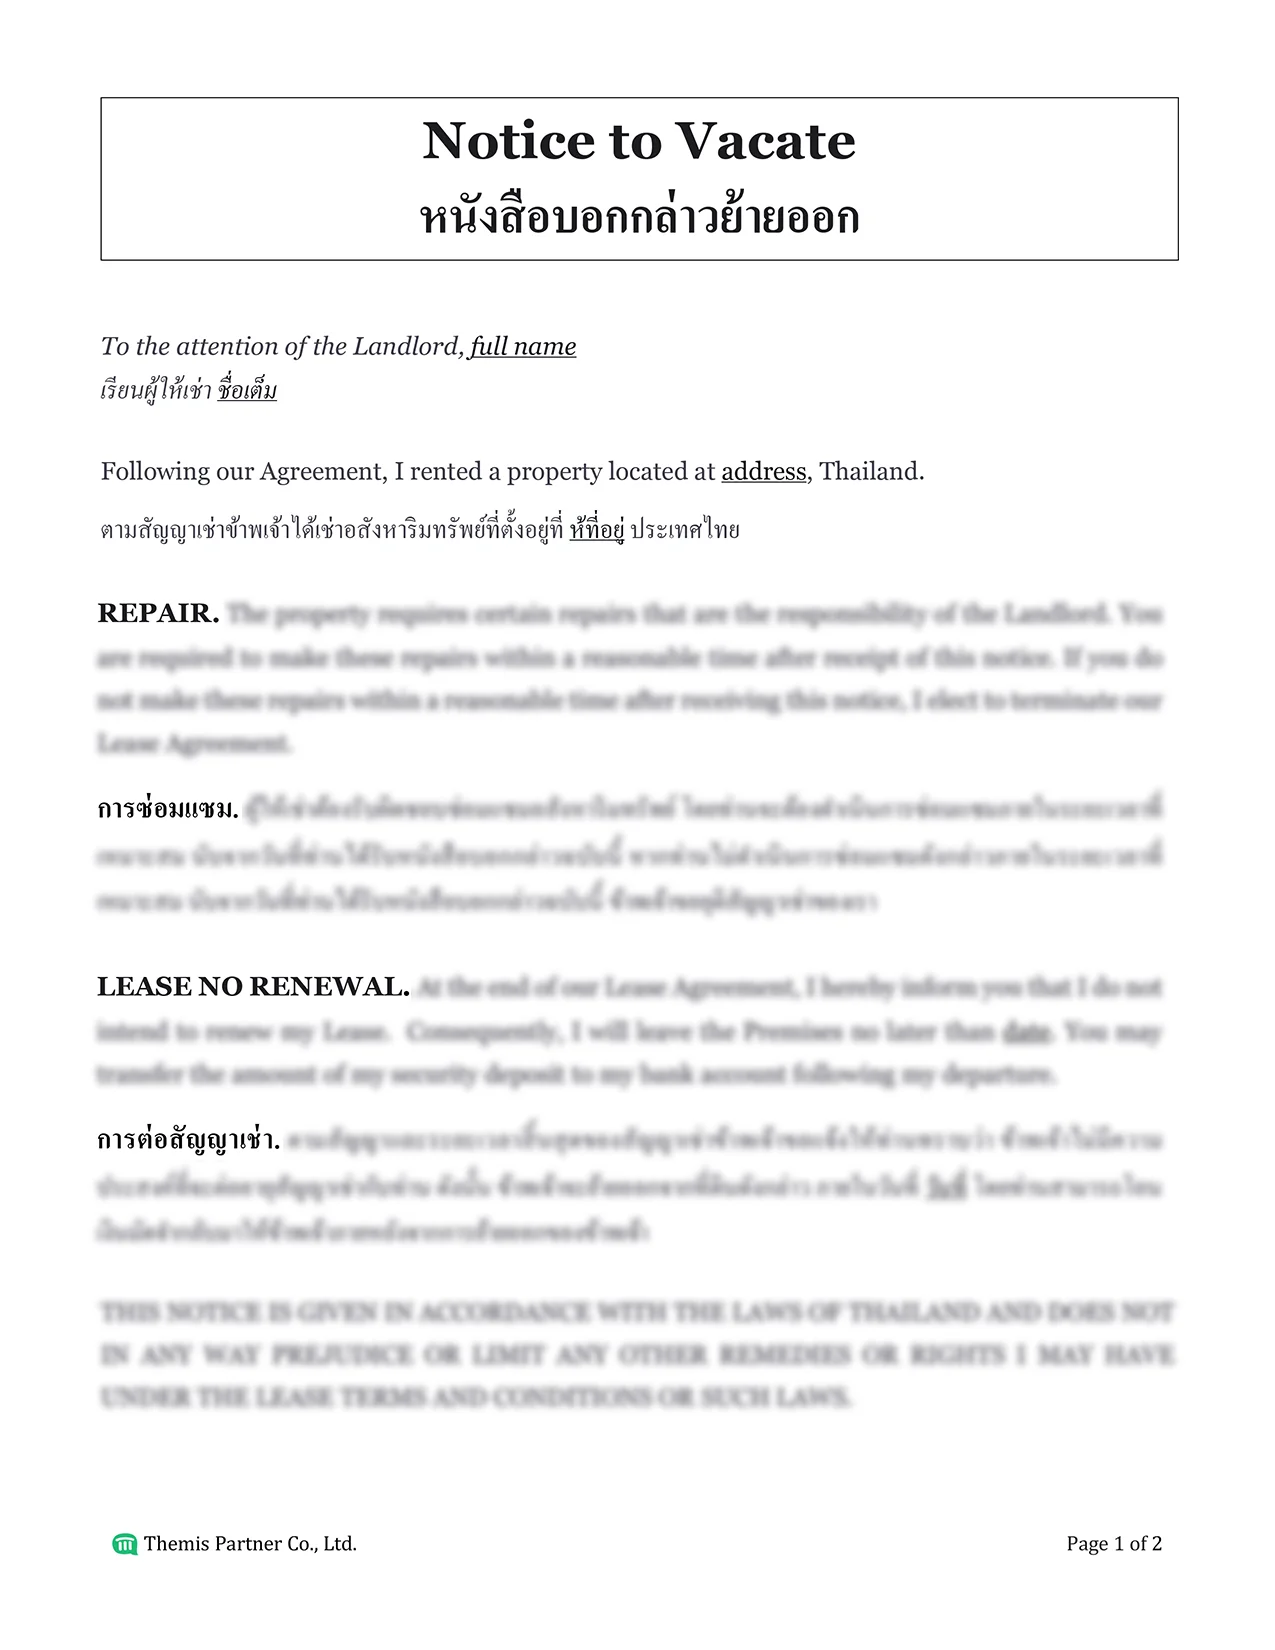 Notice to vacate letter Thailand 1